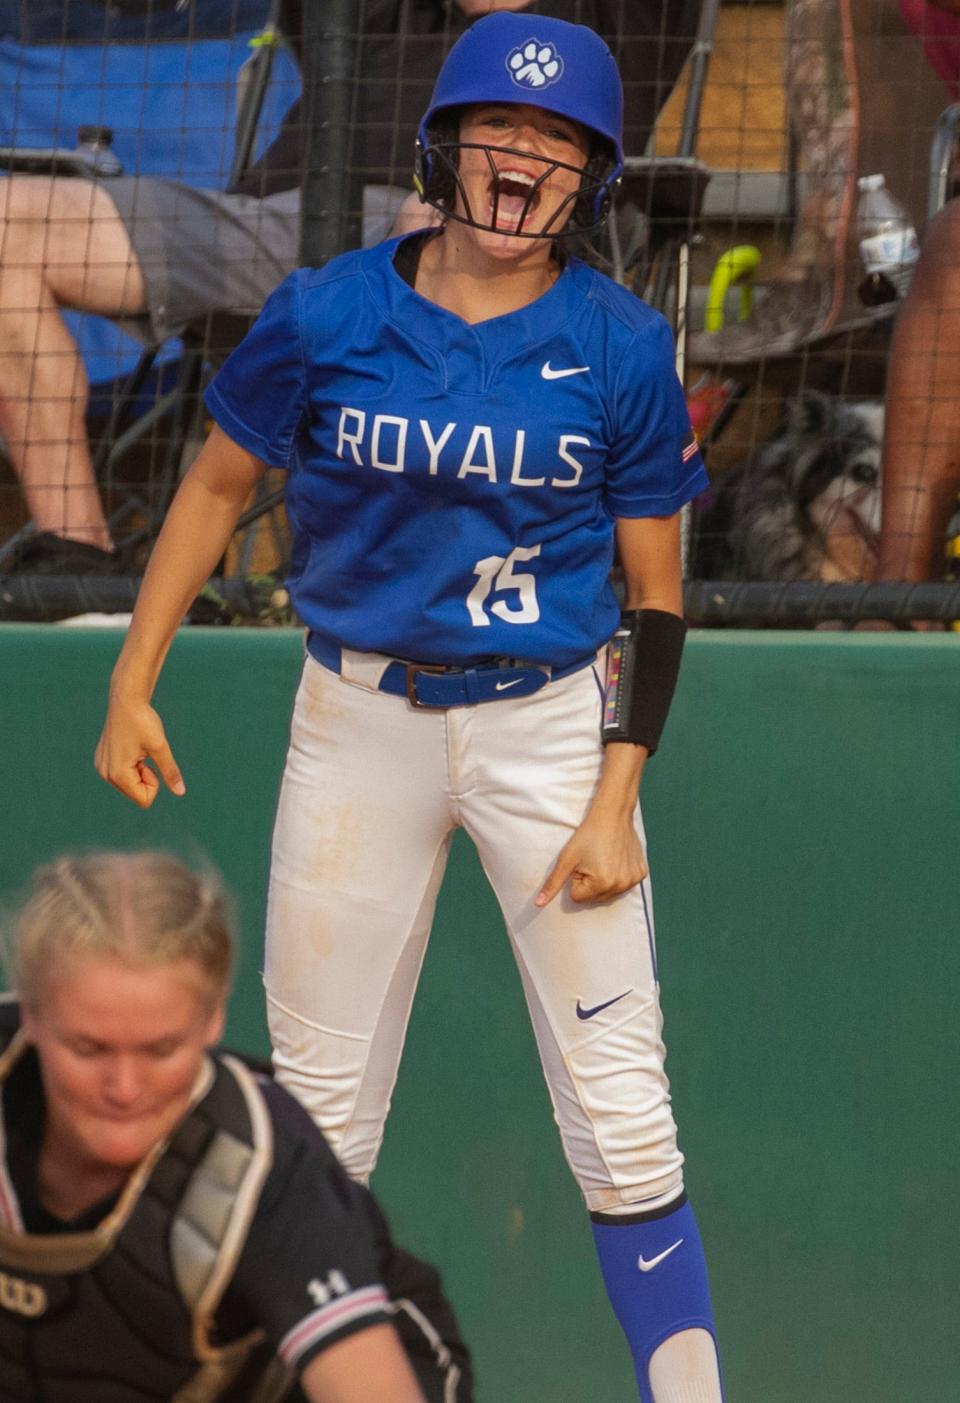 Jay High School's Kaitlyn Cooley (15) celebrates after scoring the game-winning run in the sixth inning of the FHSAA Class 1A state championship game against Fort White on Wednesday, May 25, 2022 at the Legends Way Ball Fields in Clermont.